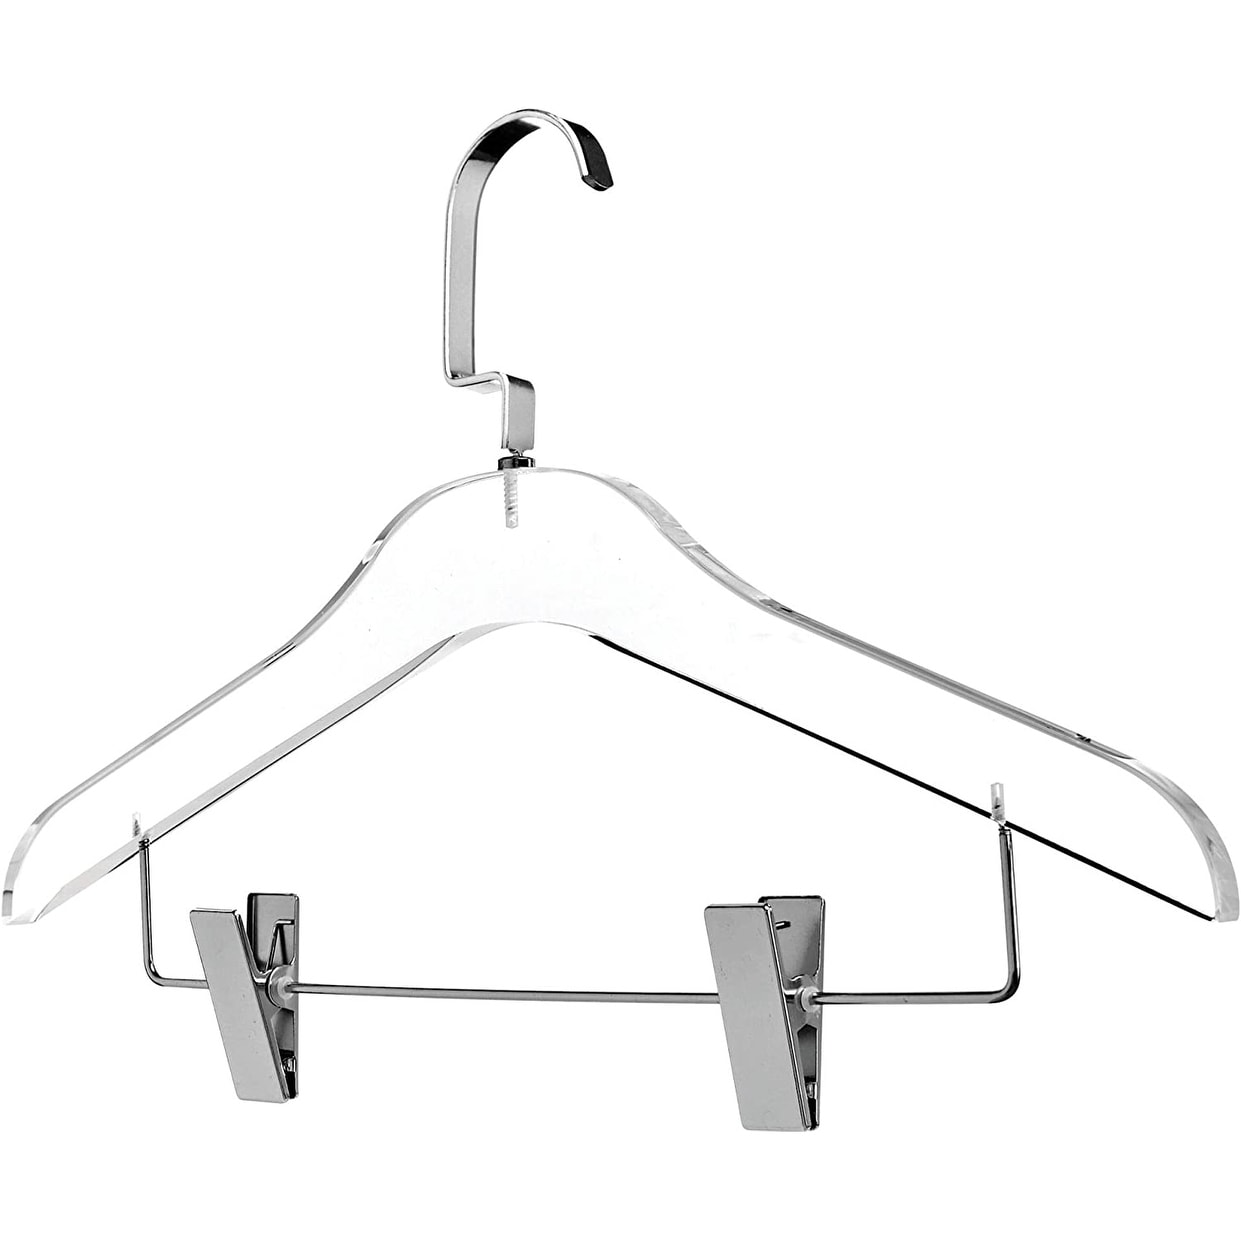 https://ak1.ostkcdn.com/images/products/is/images/direct/dadc42f7391ebed99ba0cbf606bdefeda4a9c4ac/DesignStyles-Clear-Acrylic-Clothes-Hangers-w-Hanging-Clips---10-Pk.jpg